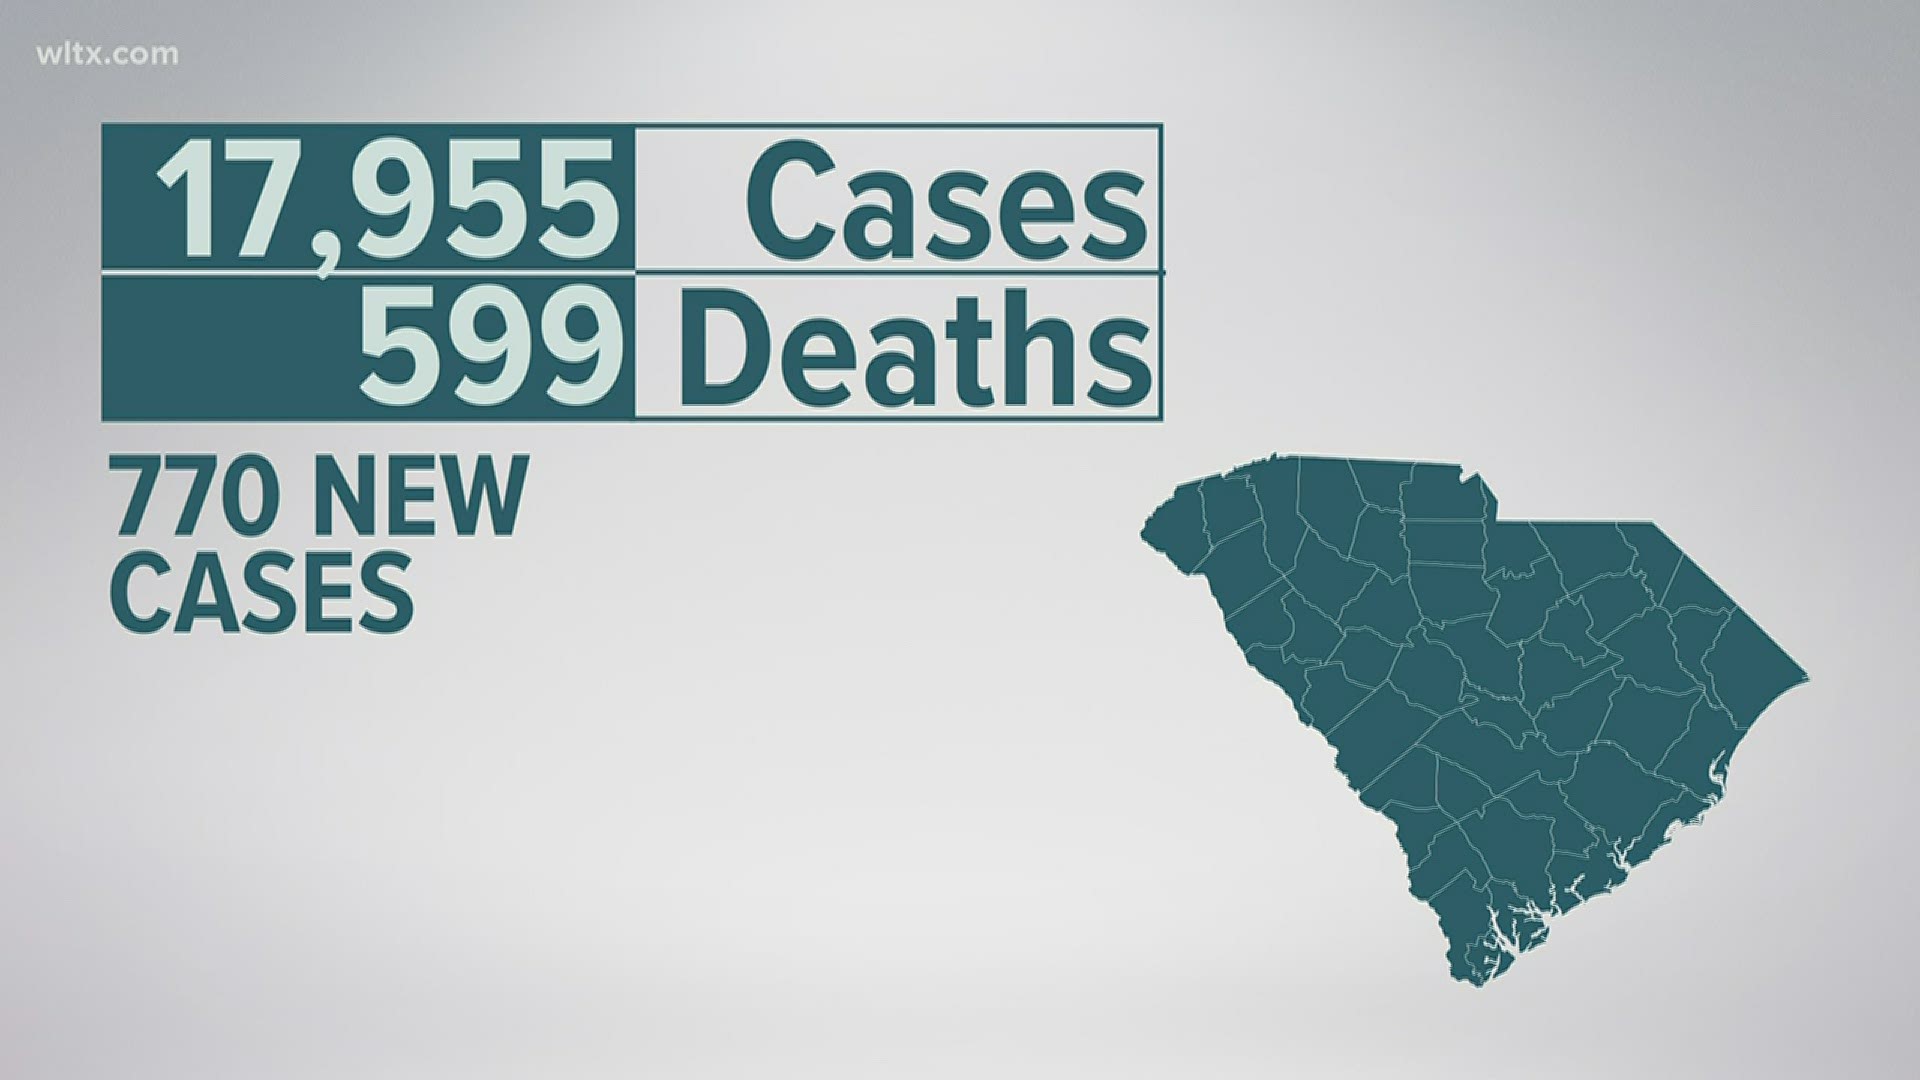 South Carolina reported 770 new coronavirus cases in the state Saturday, nearly tying the record number of cases seen a day earlier.